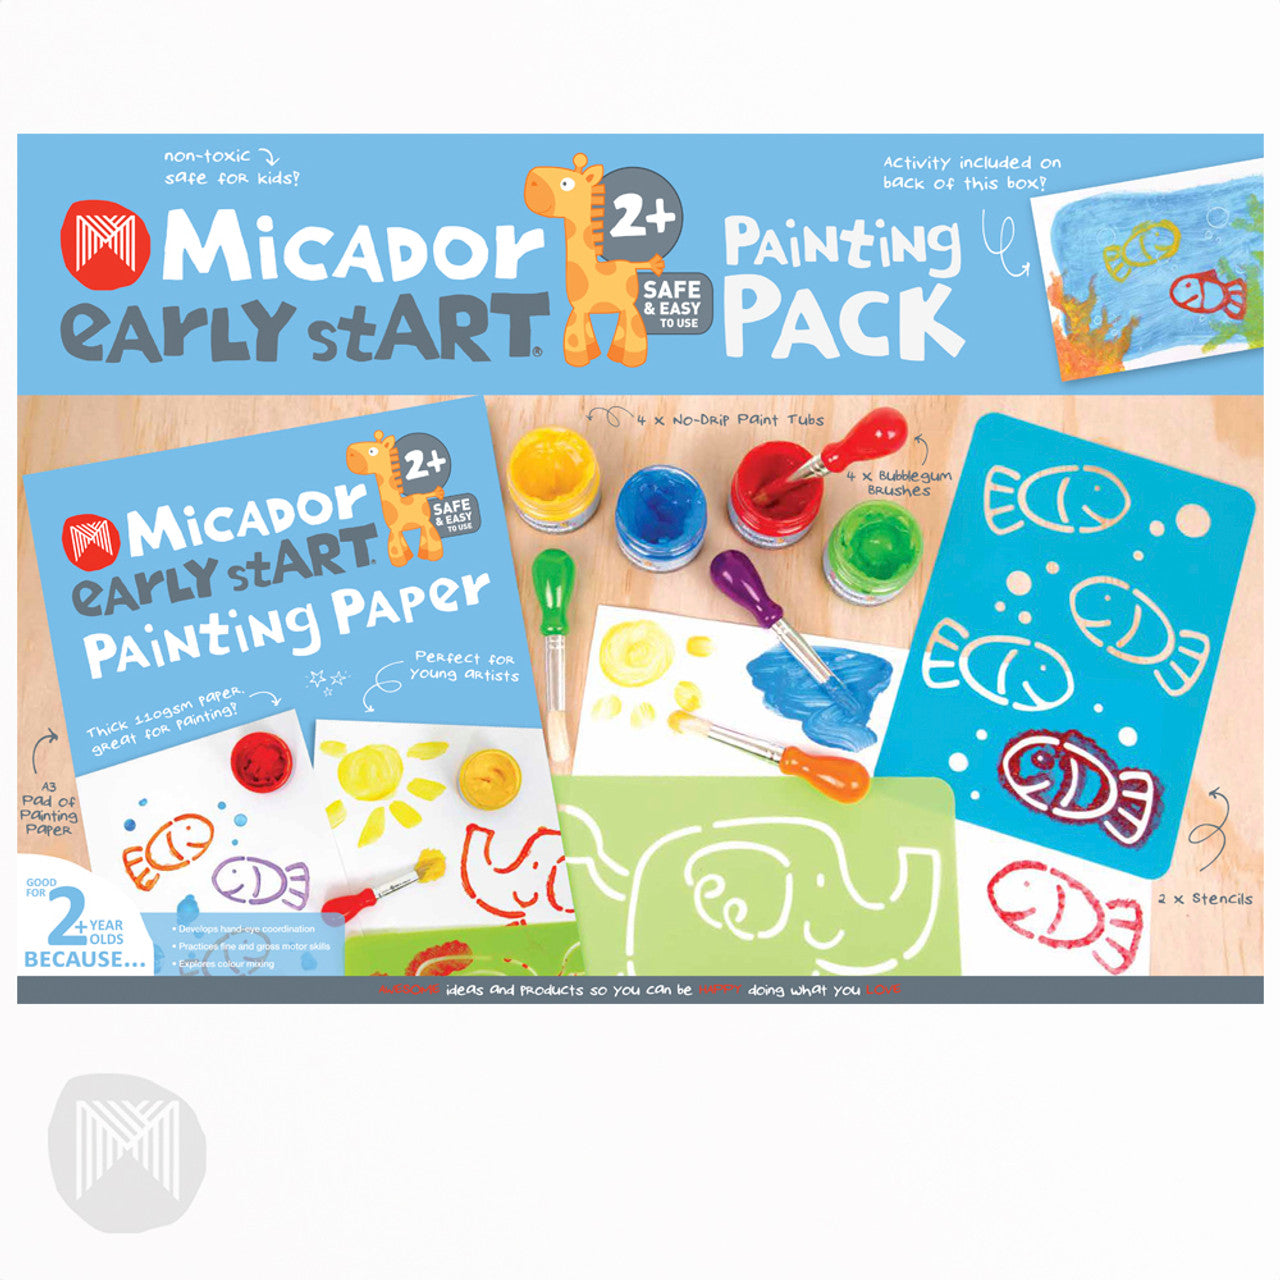 Micador Early StART Painting Pack